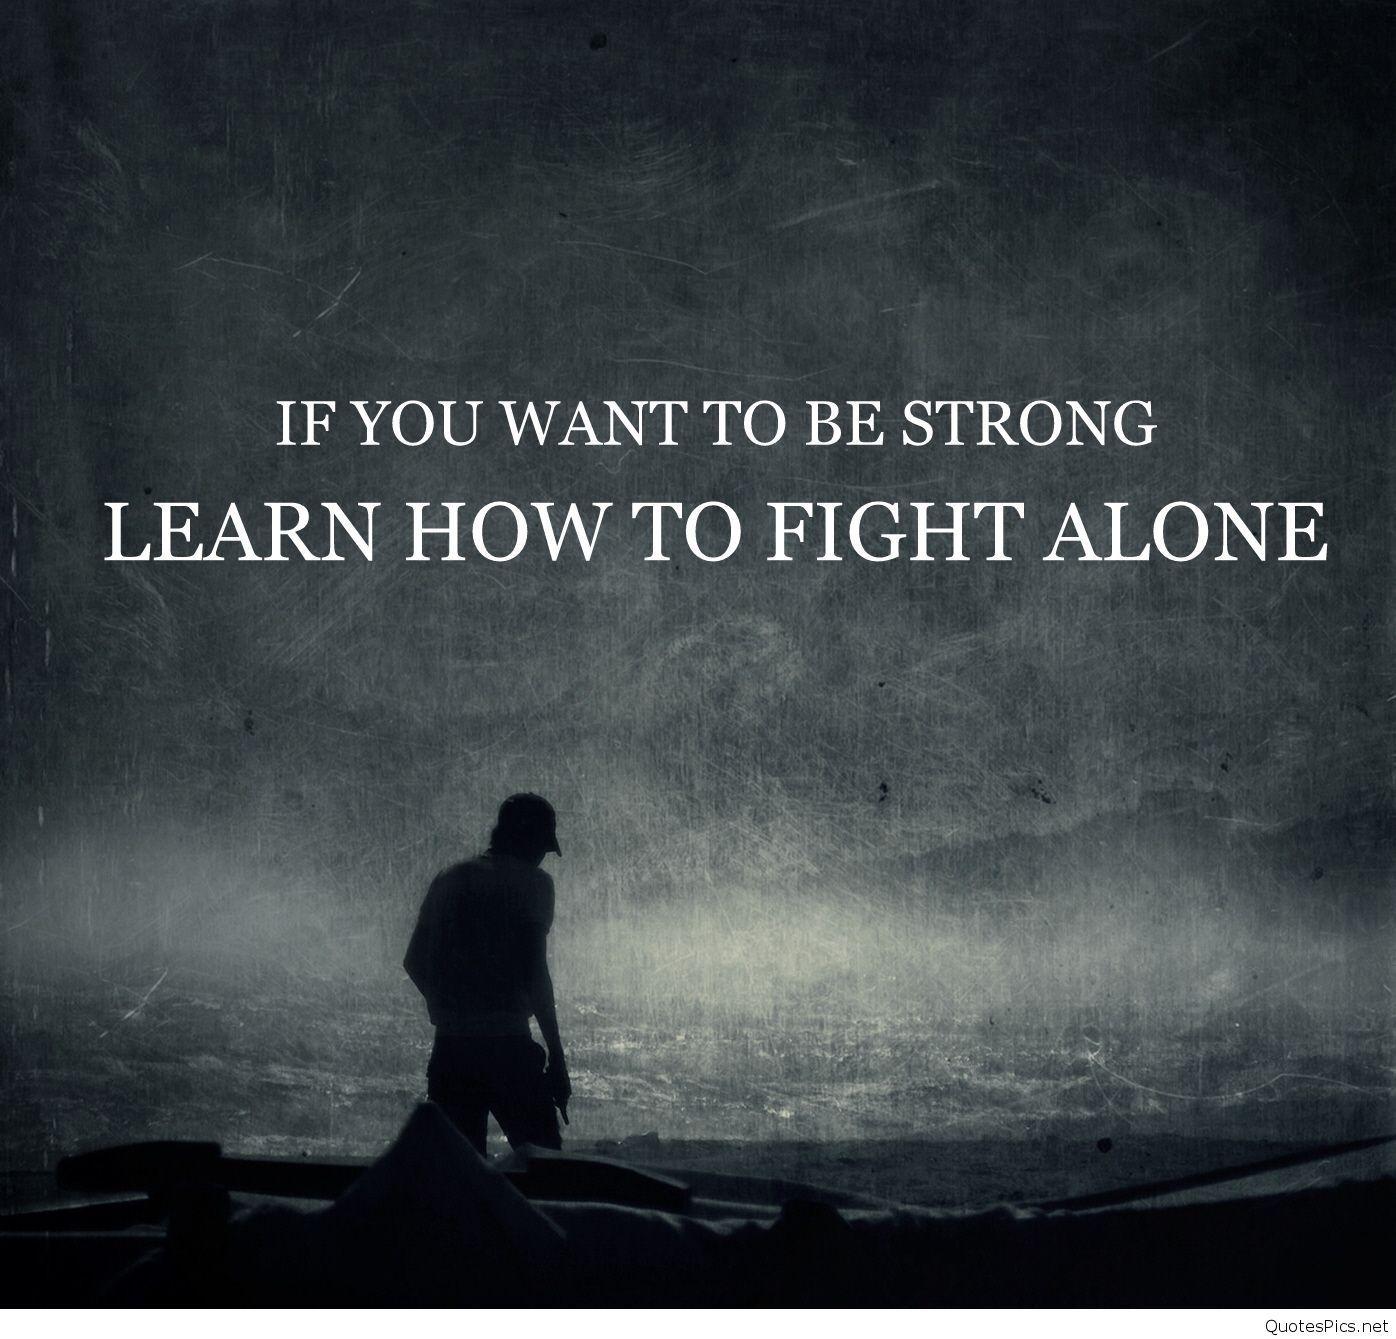 Alone Quotes Wallpapers For Mobile | Images, Pictures, Photos Free download  mobile alone wallpapers HD